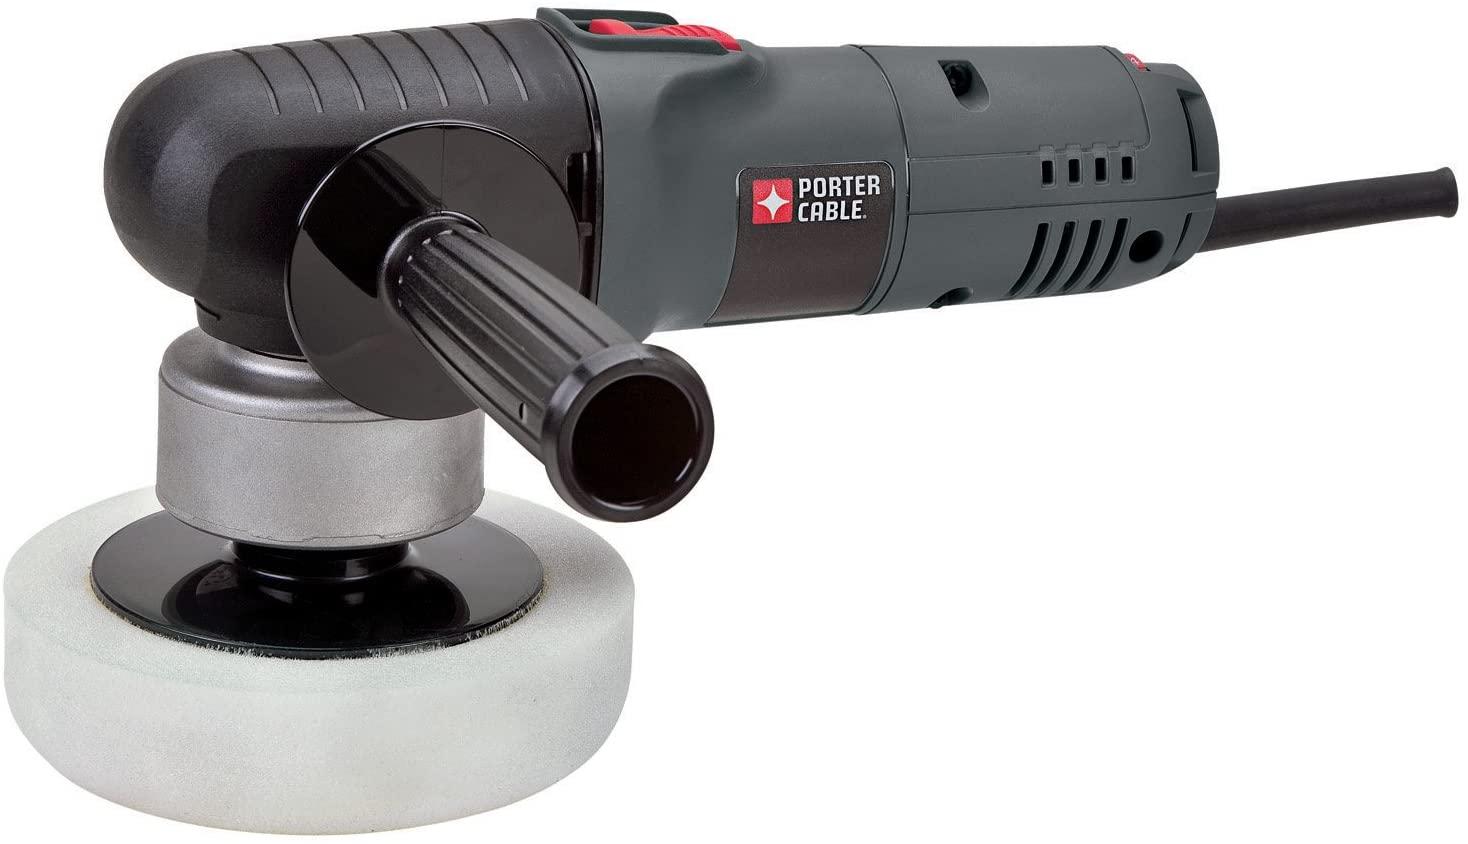 Porter-Cable 6in Random Orbit Variable Speed Polisher for $89.97 Shipped